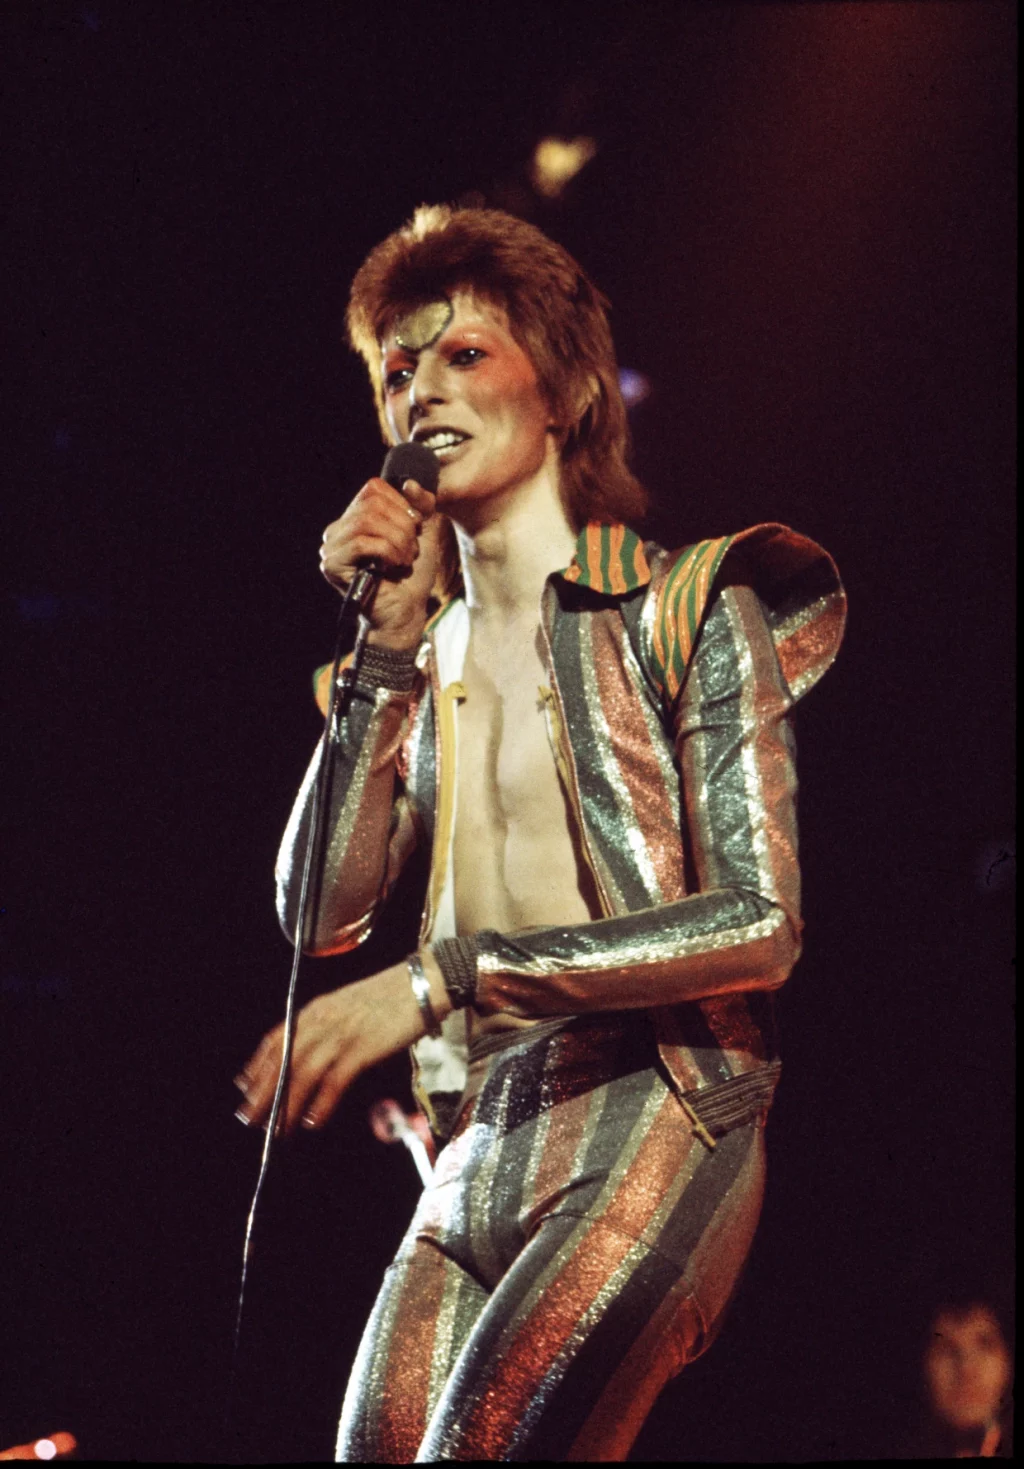 thời trang David Bowie on stage with his glam rock style 1980s